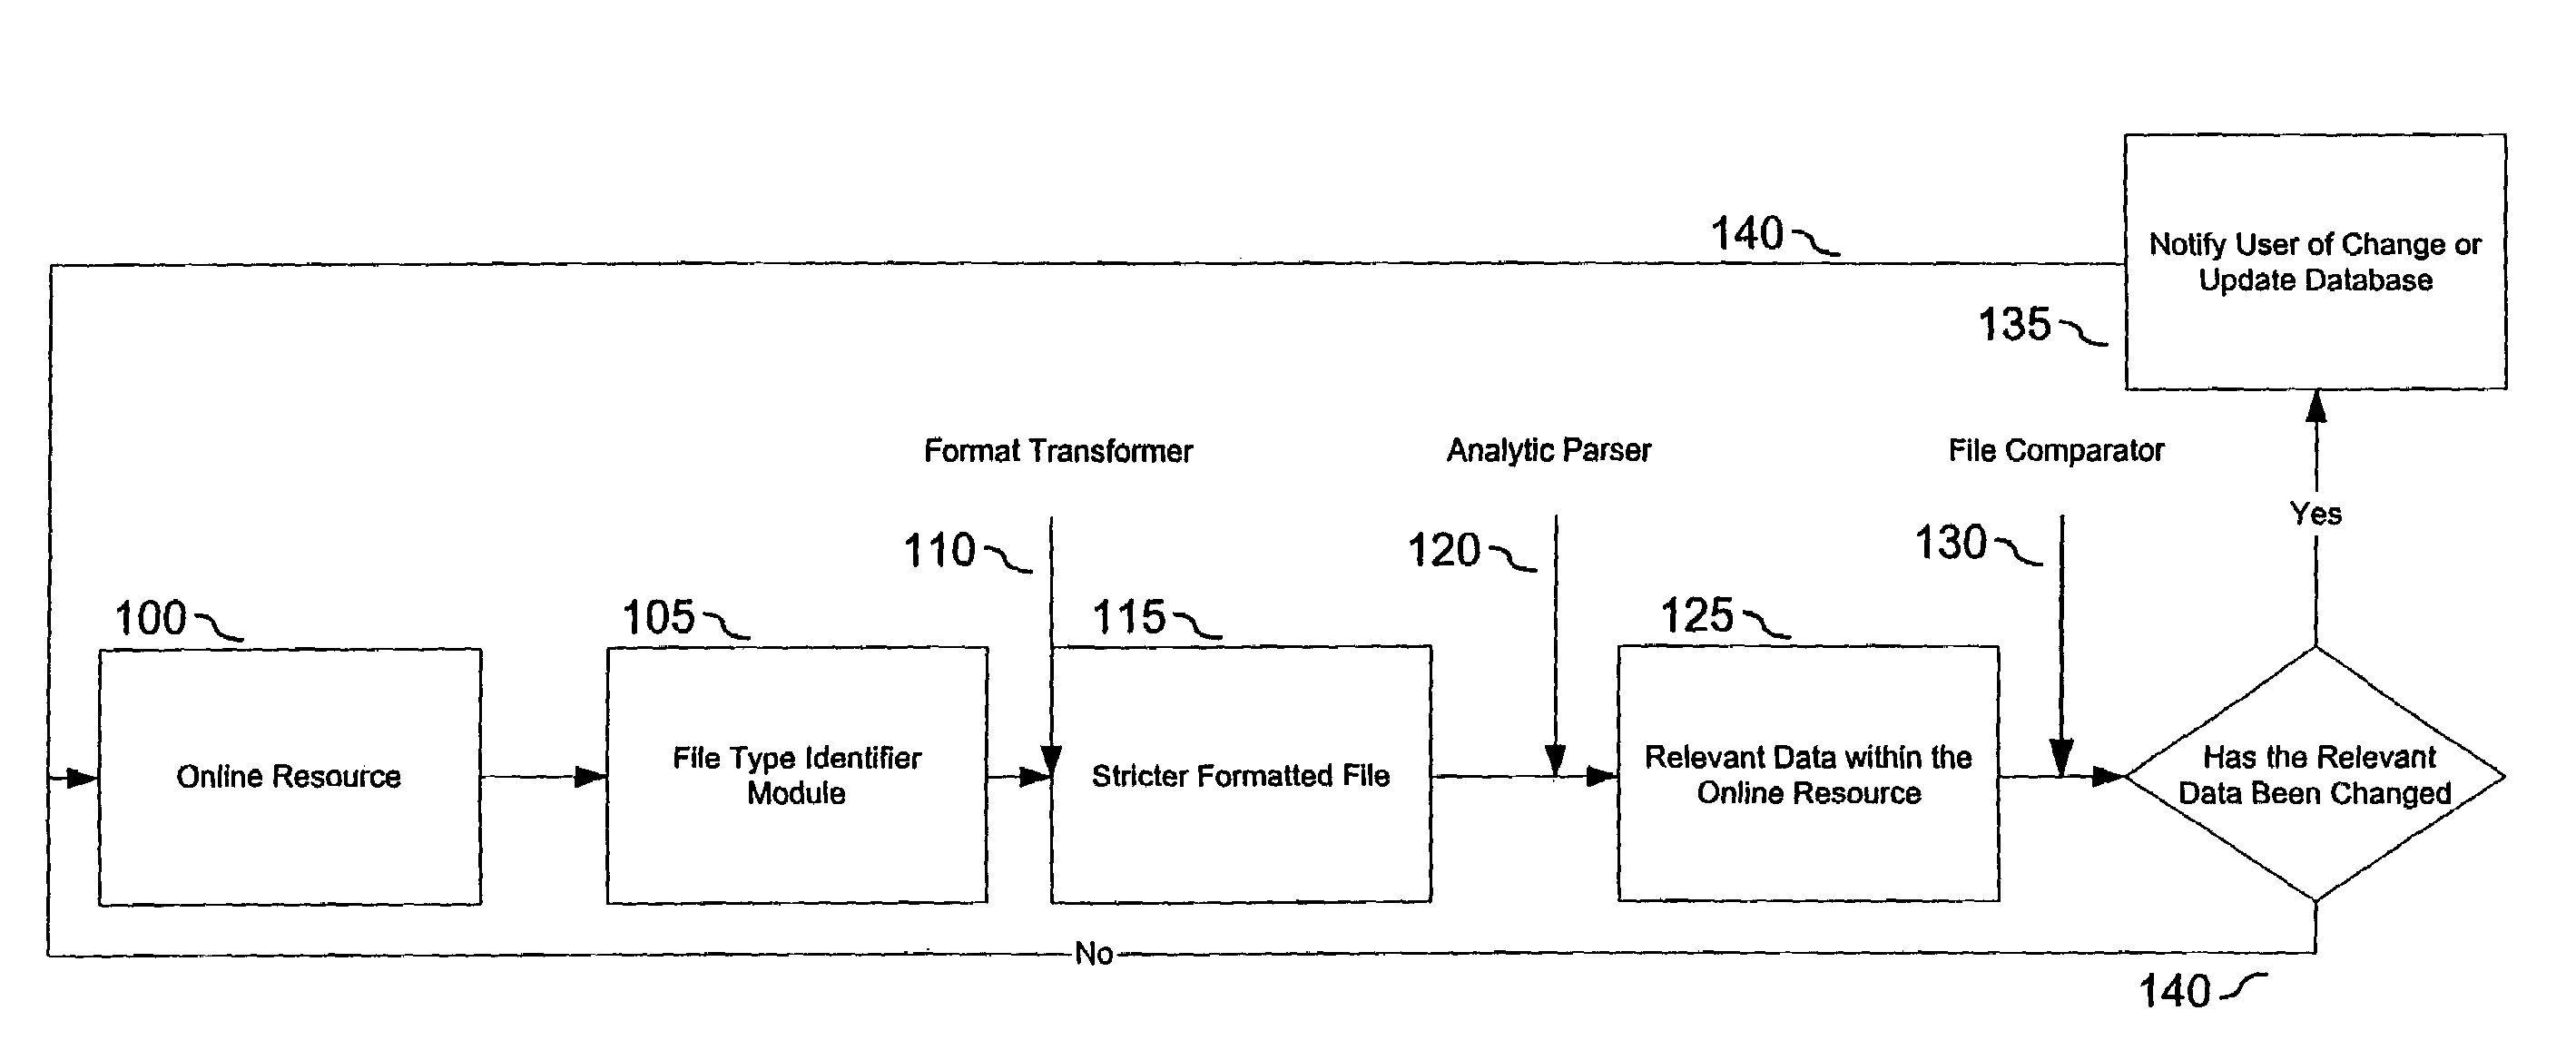 System and method for monitoring multiple online resources in different formats